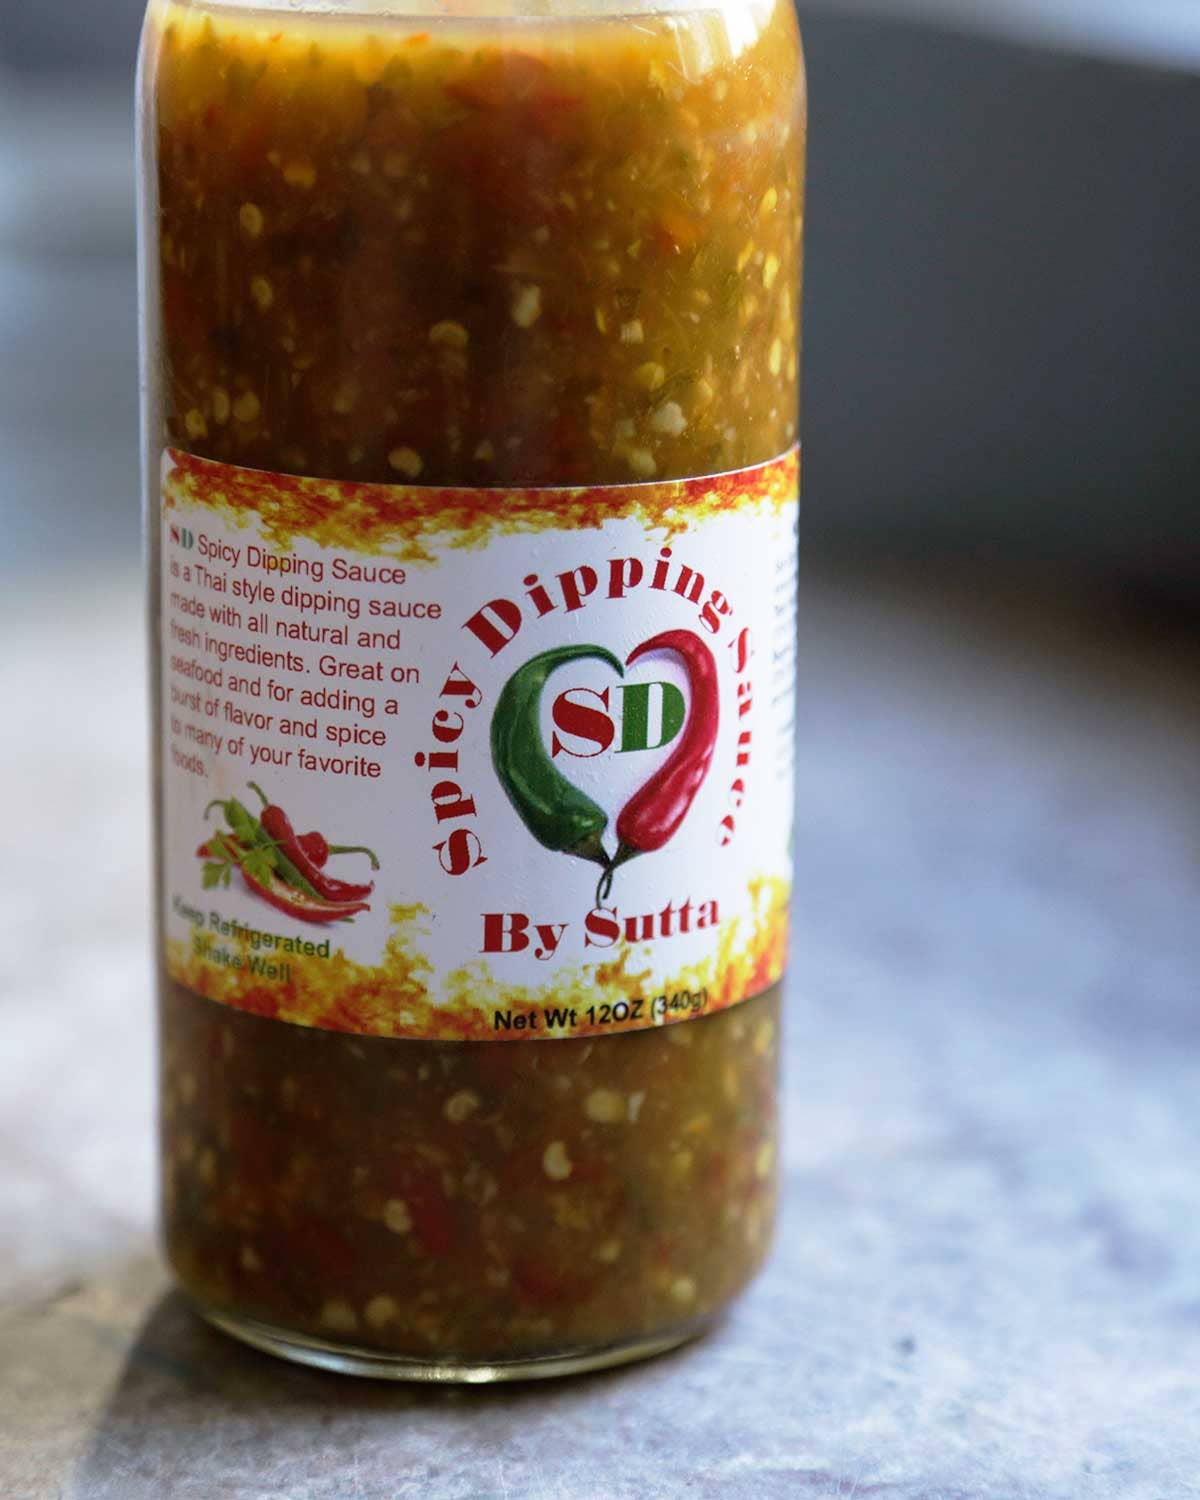 This Incredible Hot Sauce is a Taste of Thailand in a Bottle